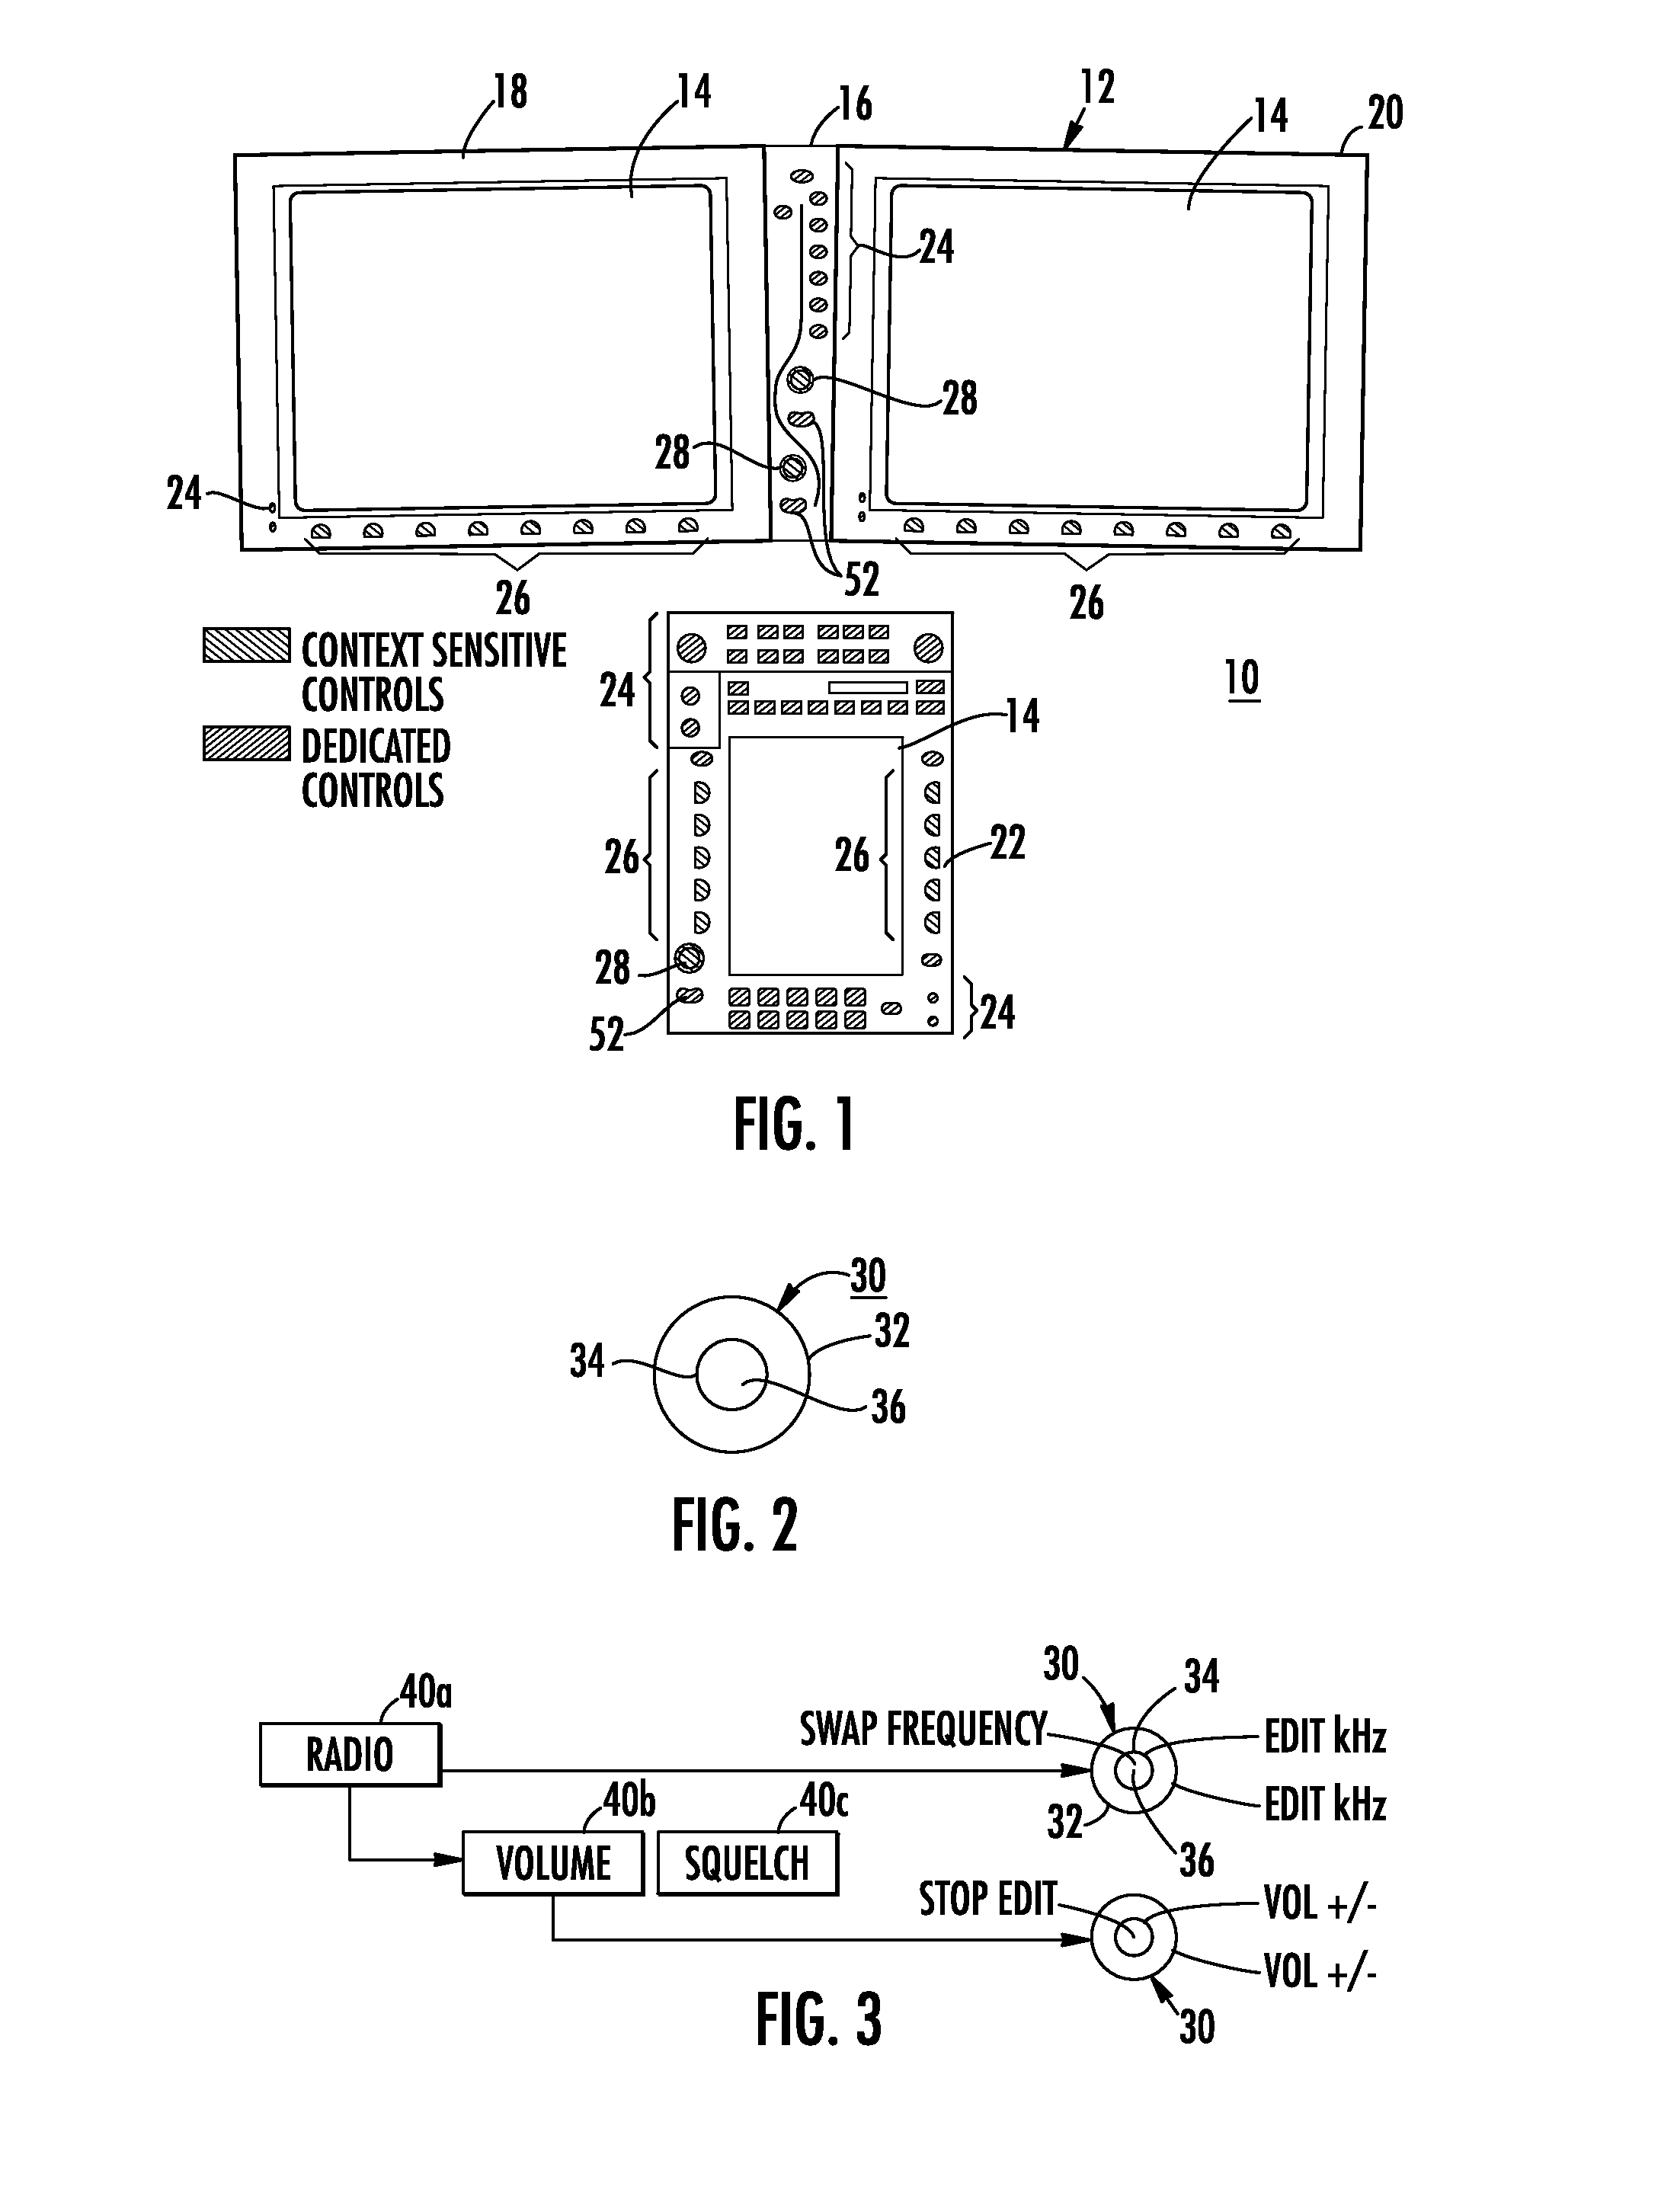 Aircraft avionic system having a pilot user interface with context dependent input devices